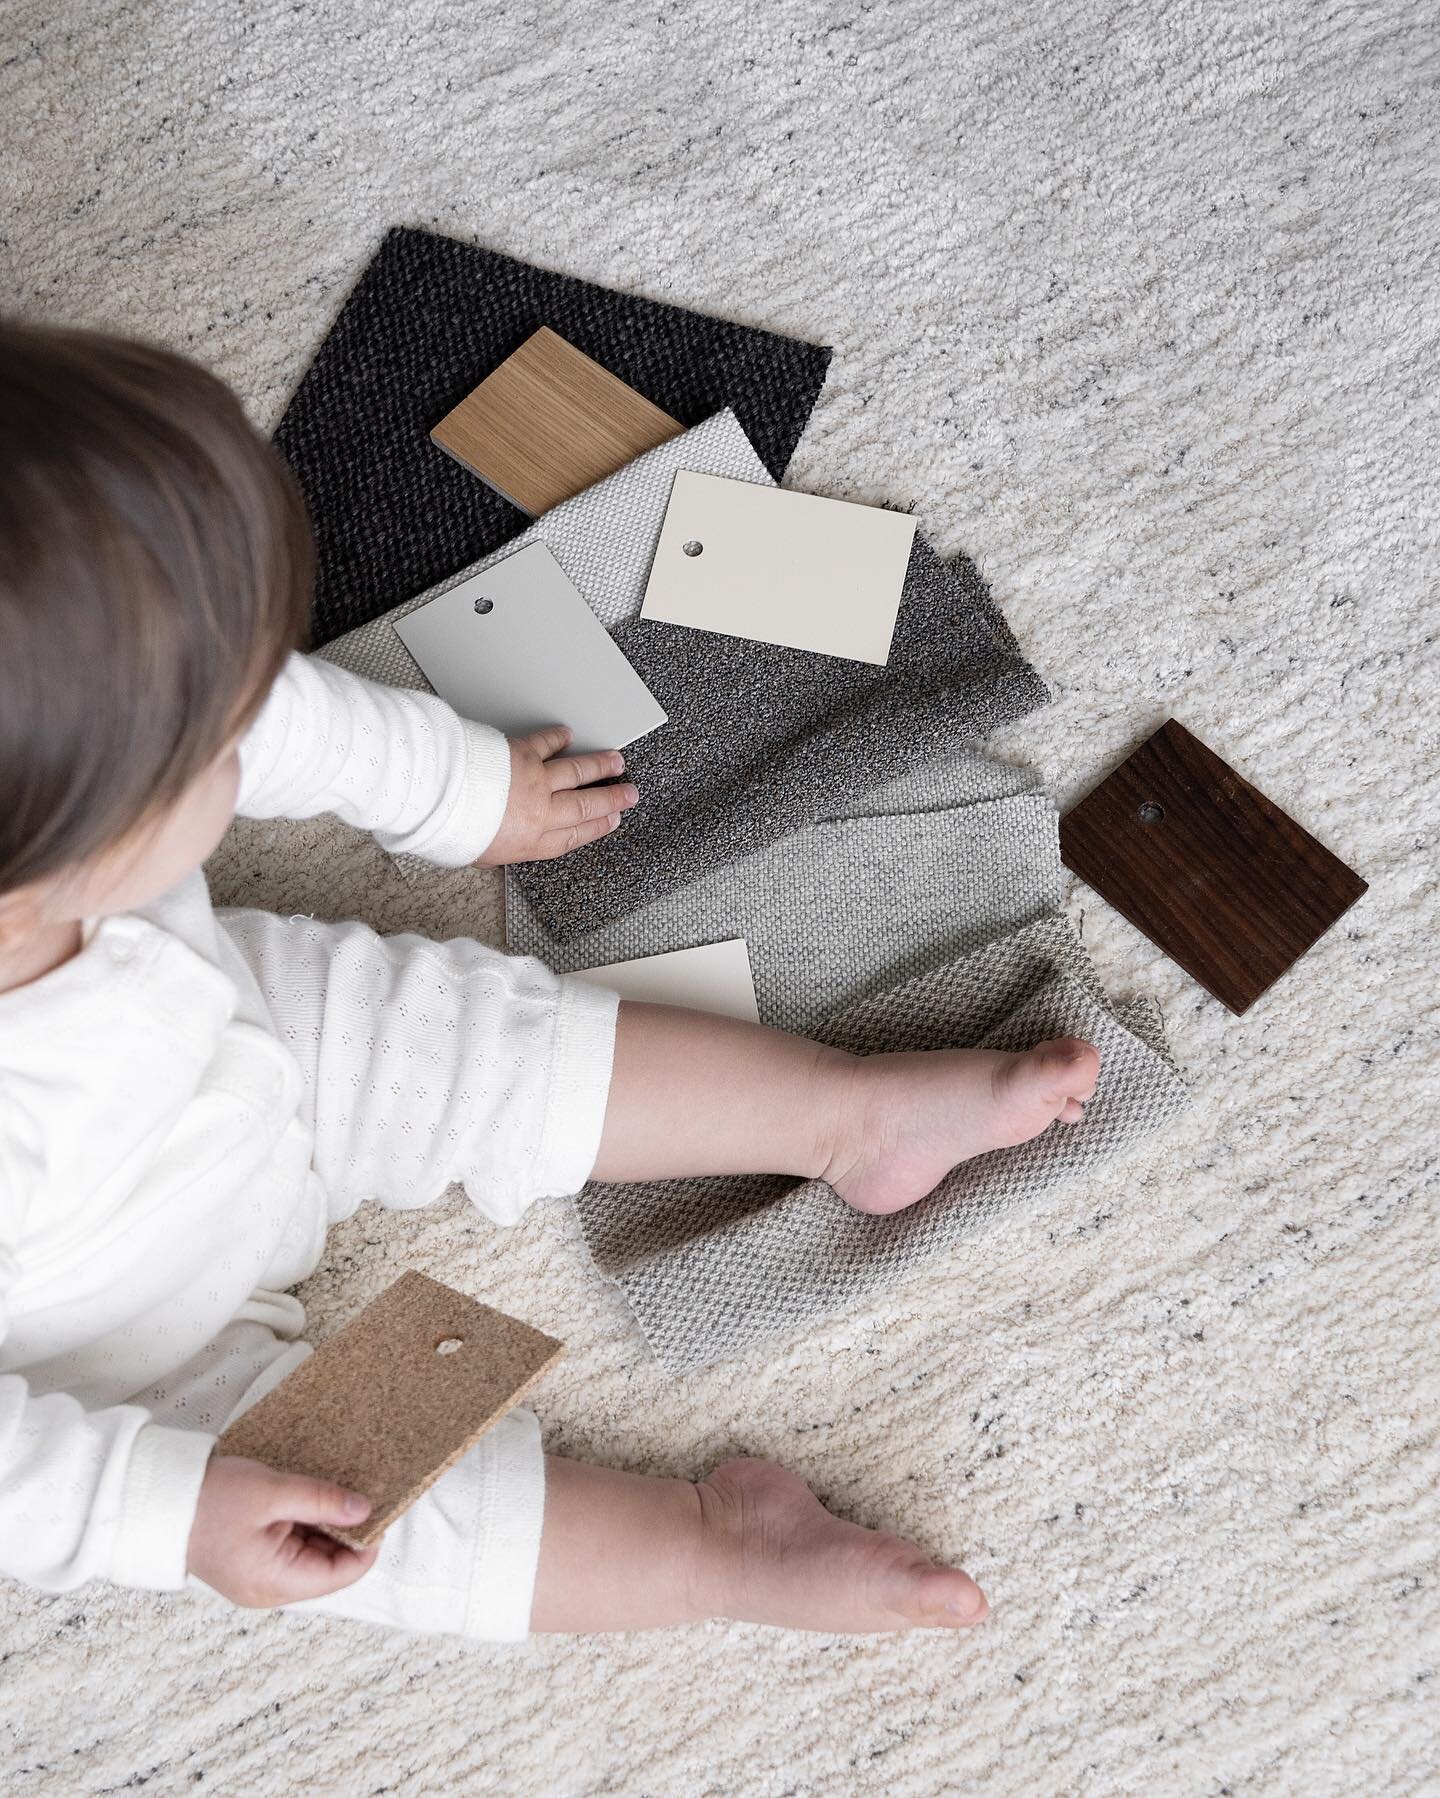 From a very young age we are drawn to tactile experiences that engage our senses and connect us to our surroundings. So, it is by layering different materials and textures in our spaces that we satisfy our innate desire to touch.
&bull;
Desde una eda